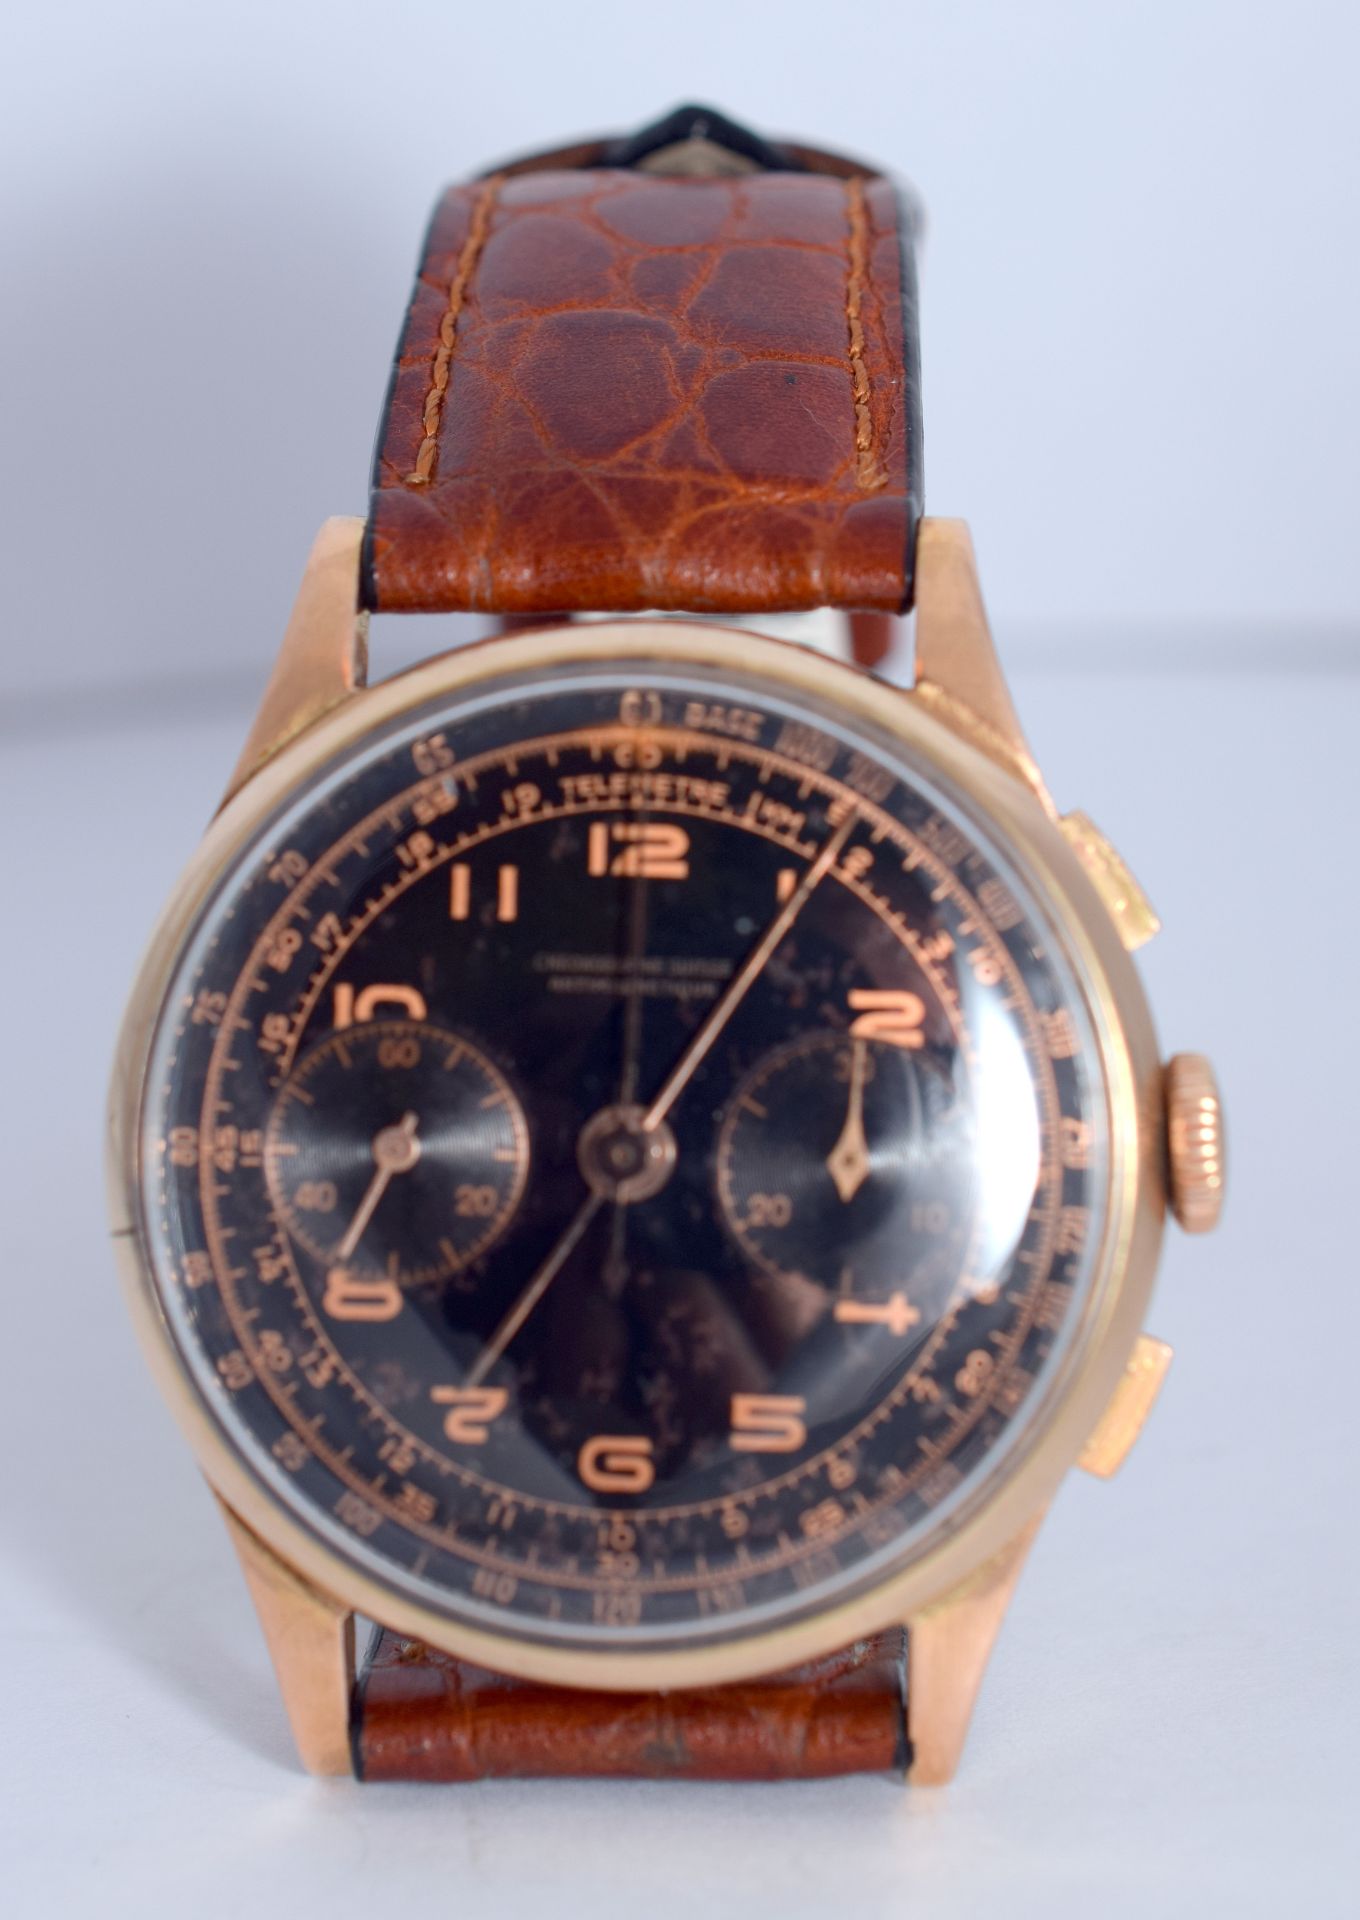 Chronographe Suisse 18ct Gold Vintage Chronograph With Black Dial - Image 8 of 11